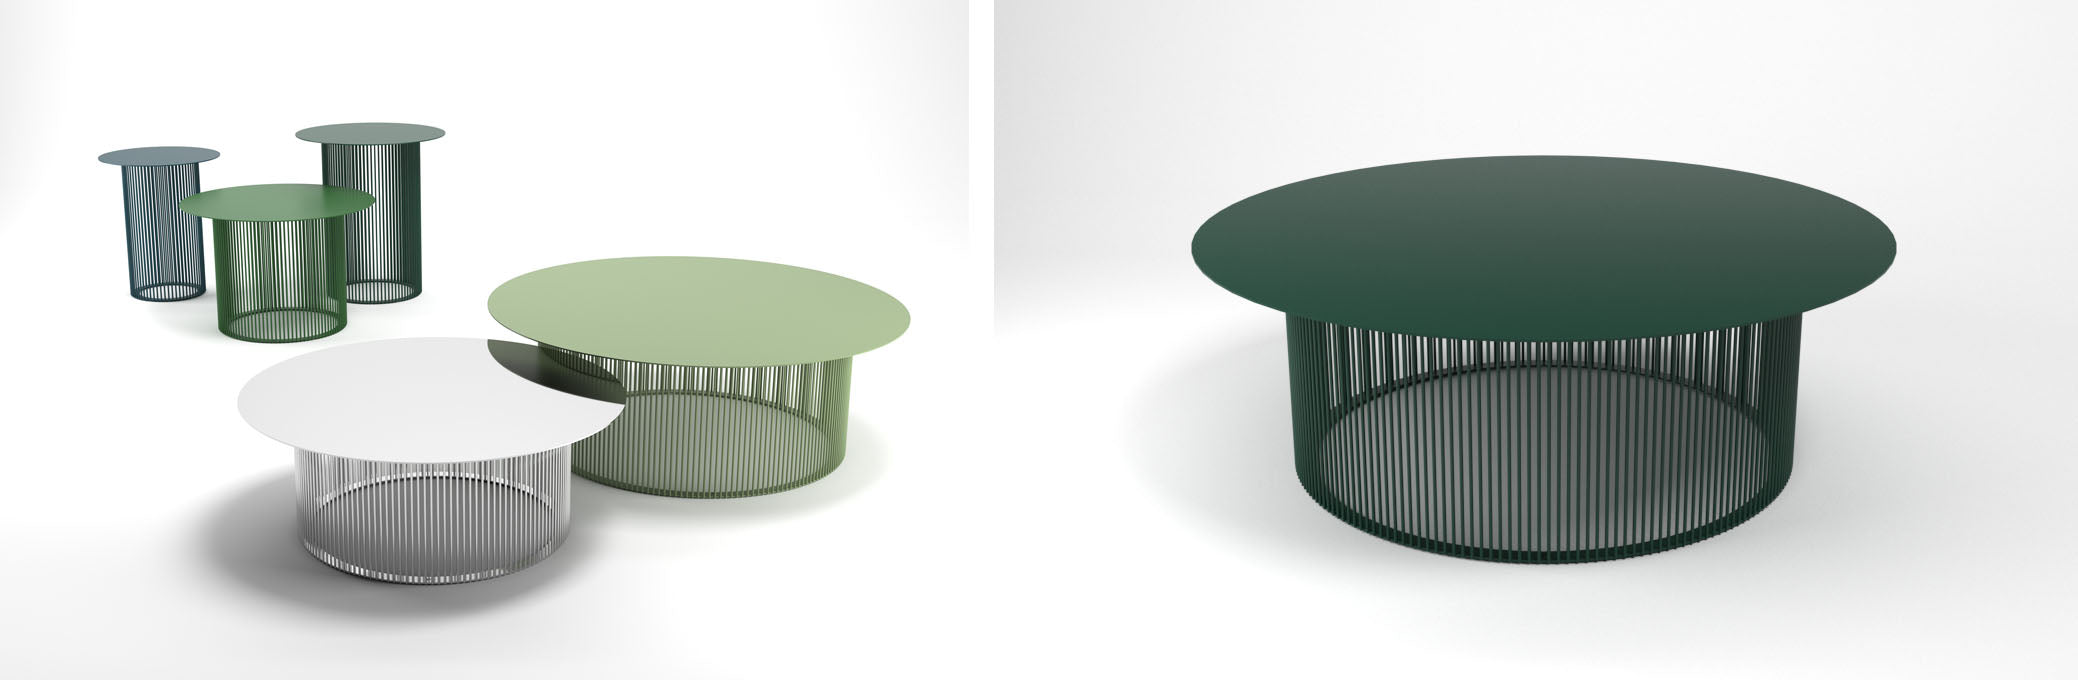 Haldane Martin, Cha Cha outdoor furniture collection, green outdoor tables and chairs.  Haldane Martin outdoor furniture is available at Sarza home goods and furniture store in Rye New York. 